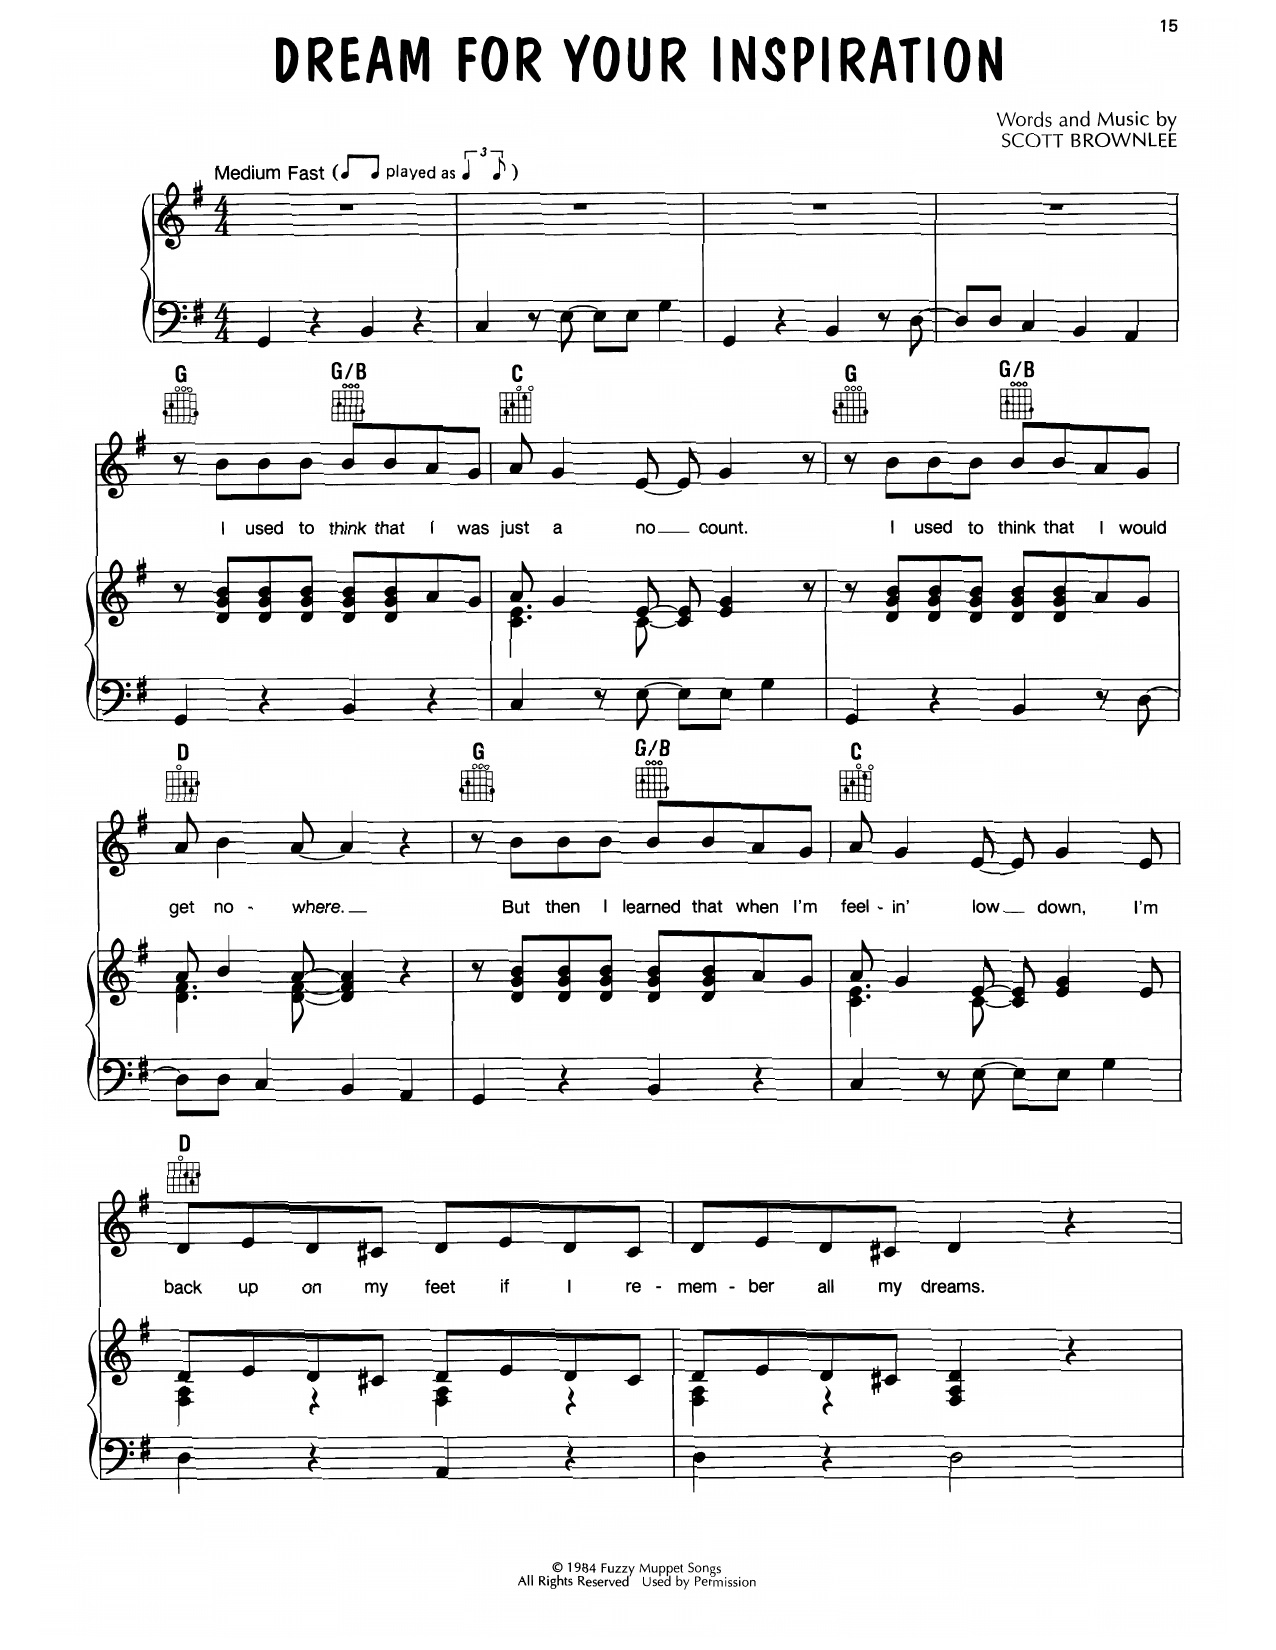 Download Scott Brownlee Dream For Your Inspiration (from Muppet Sheet Music